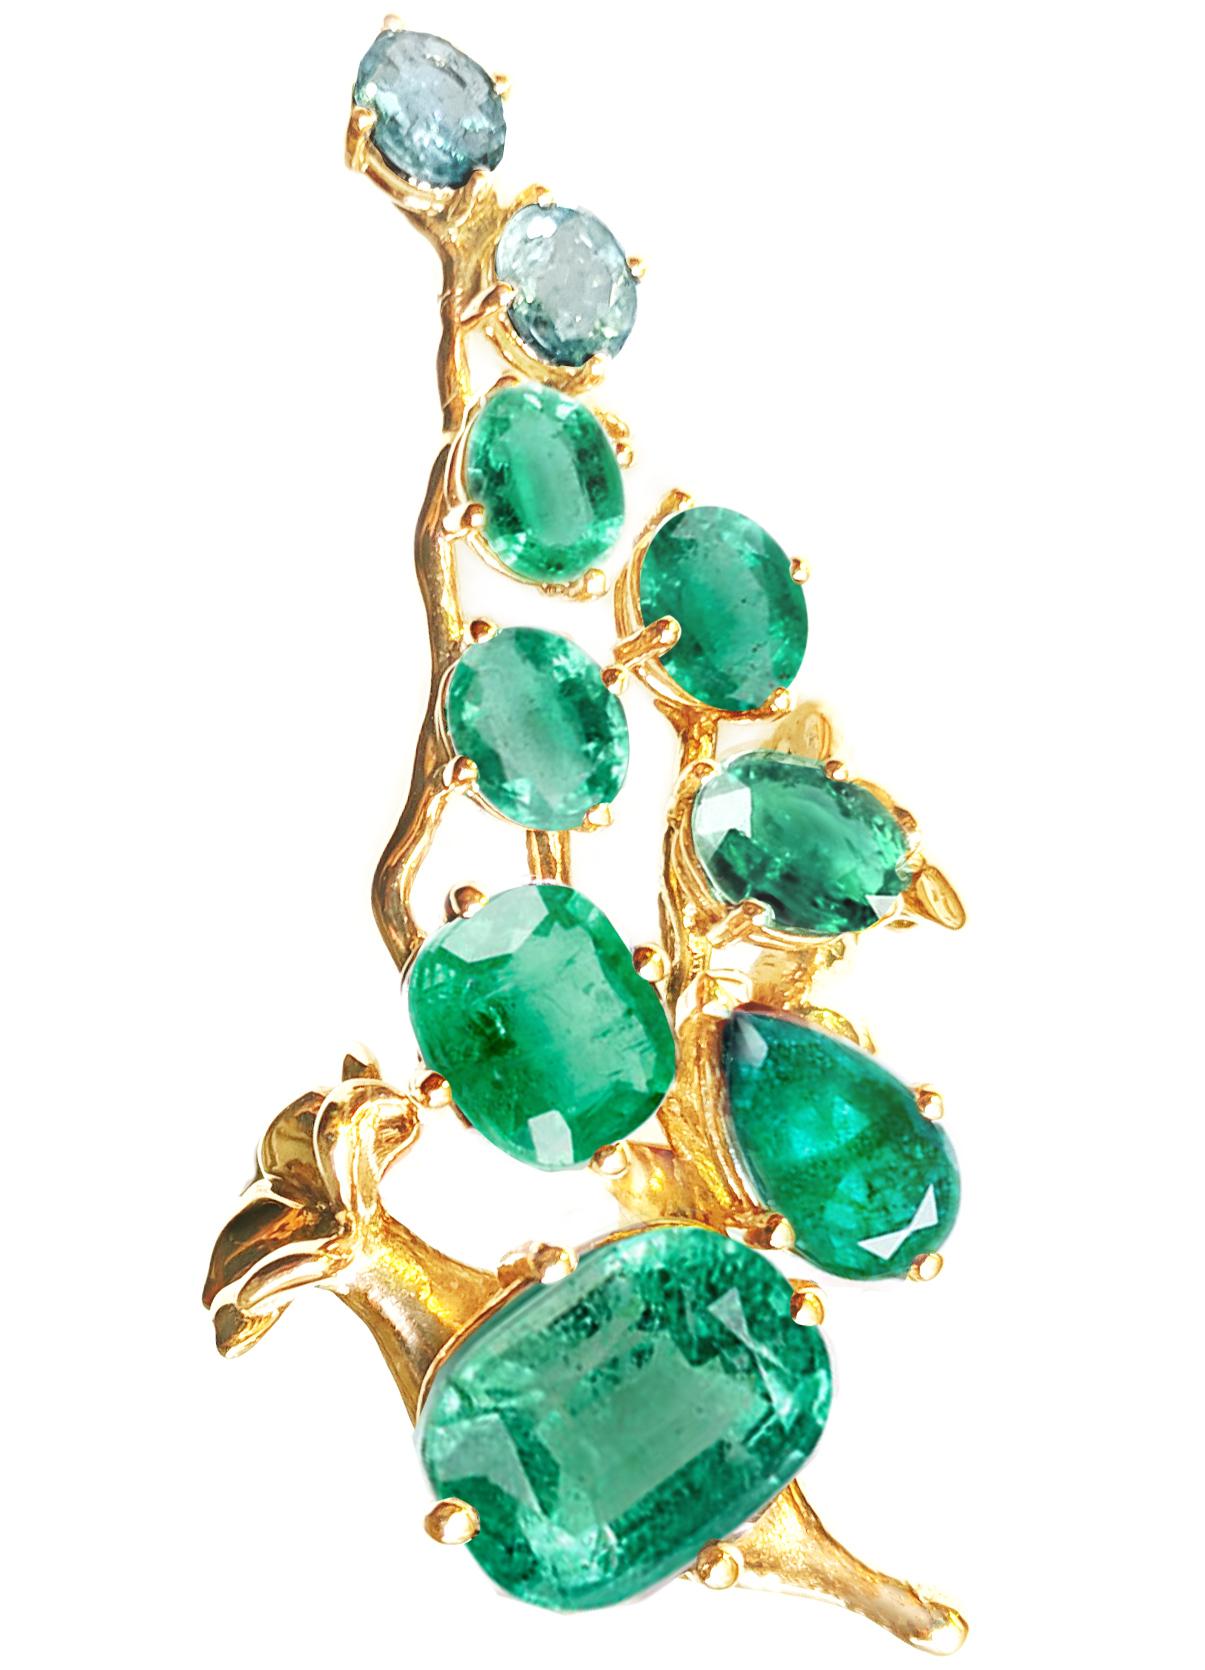 This Tobacco Flower contemporary floral brooch is made of 18 karat yellow gold. The natural gems in this piece include a cushion cut emerald of 3.48 carats (10.5x9 mm) and another of 1.37 carats (8.4x6 mm), a pear cut emerald of 0.98 carats (8.5x5.2